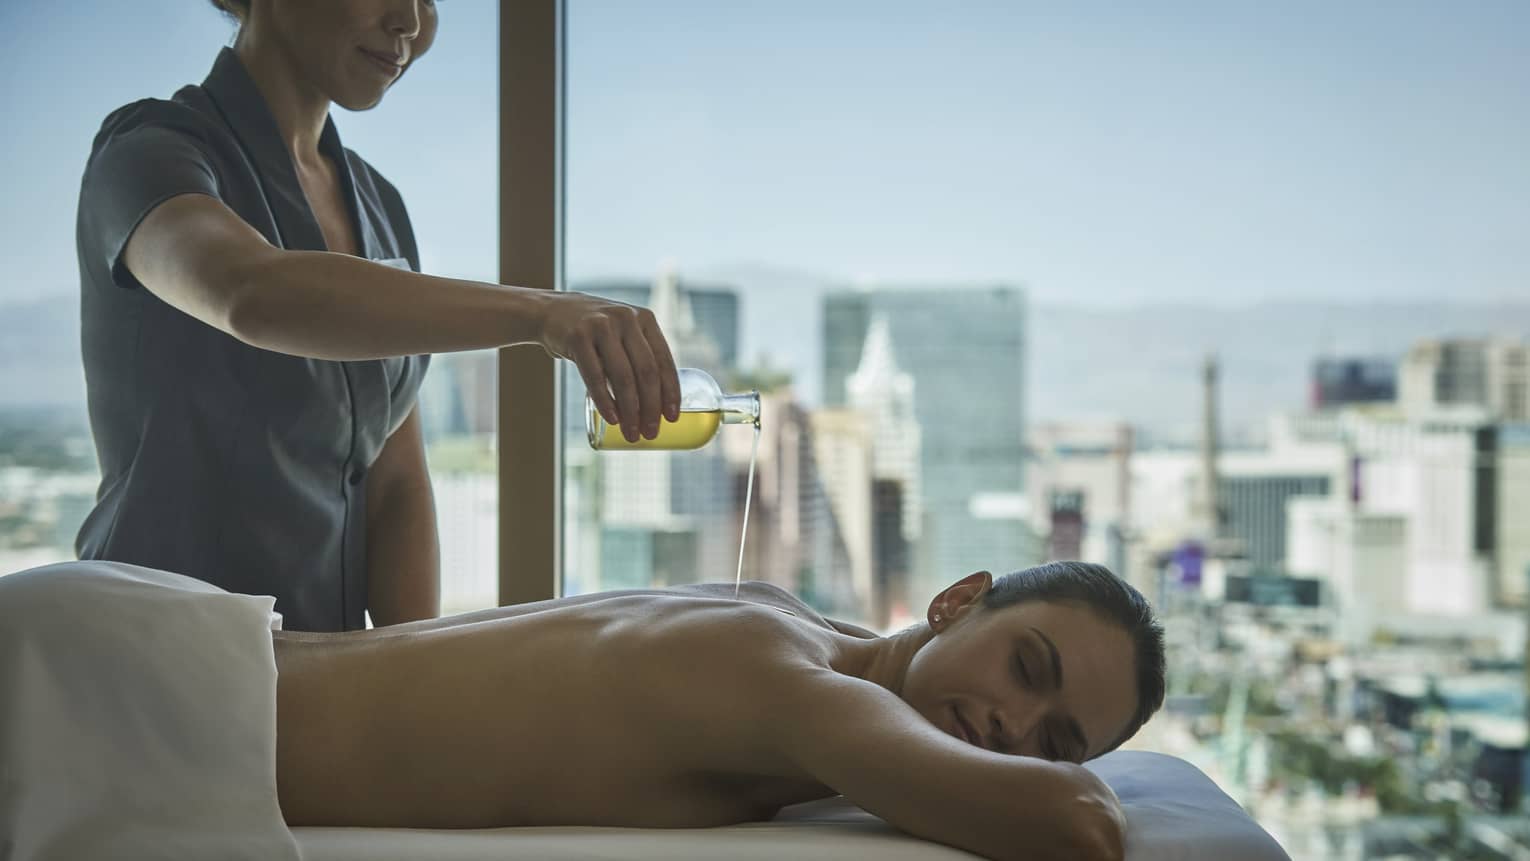 A woman with eyes closed lies on massage table and receives a treatment in a room with a view of the city skyline